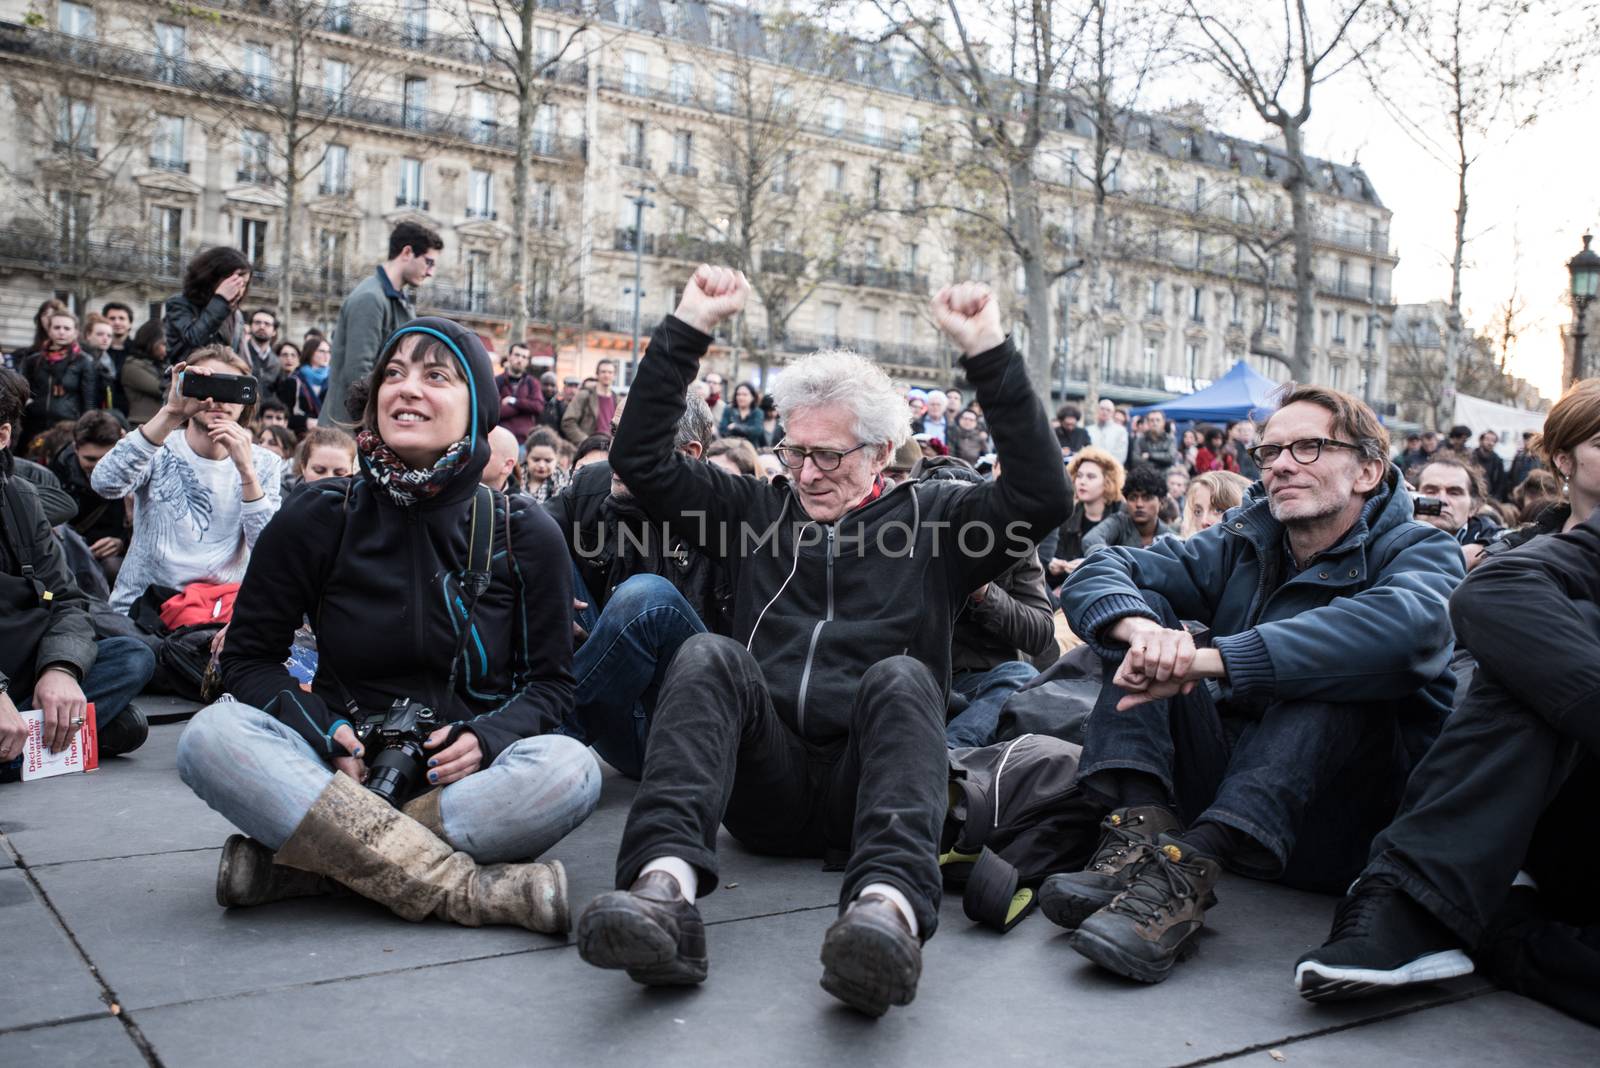 FRANCE - POLITICS - PROTEST - LABOUR - LAW - MOVEMENT by newzulu